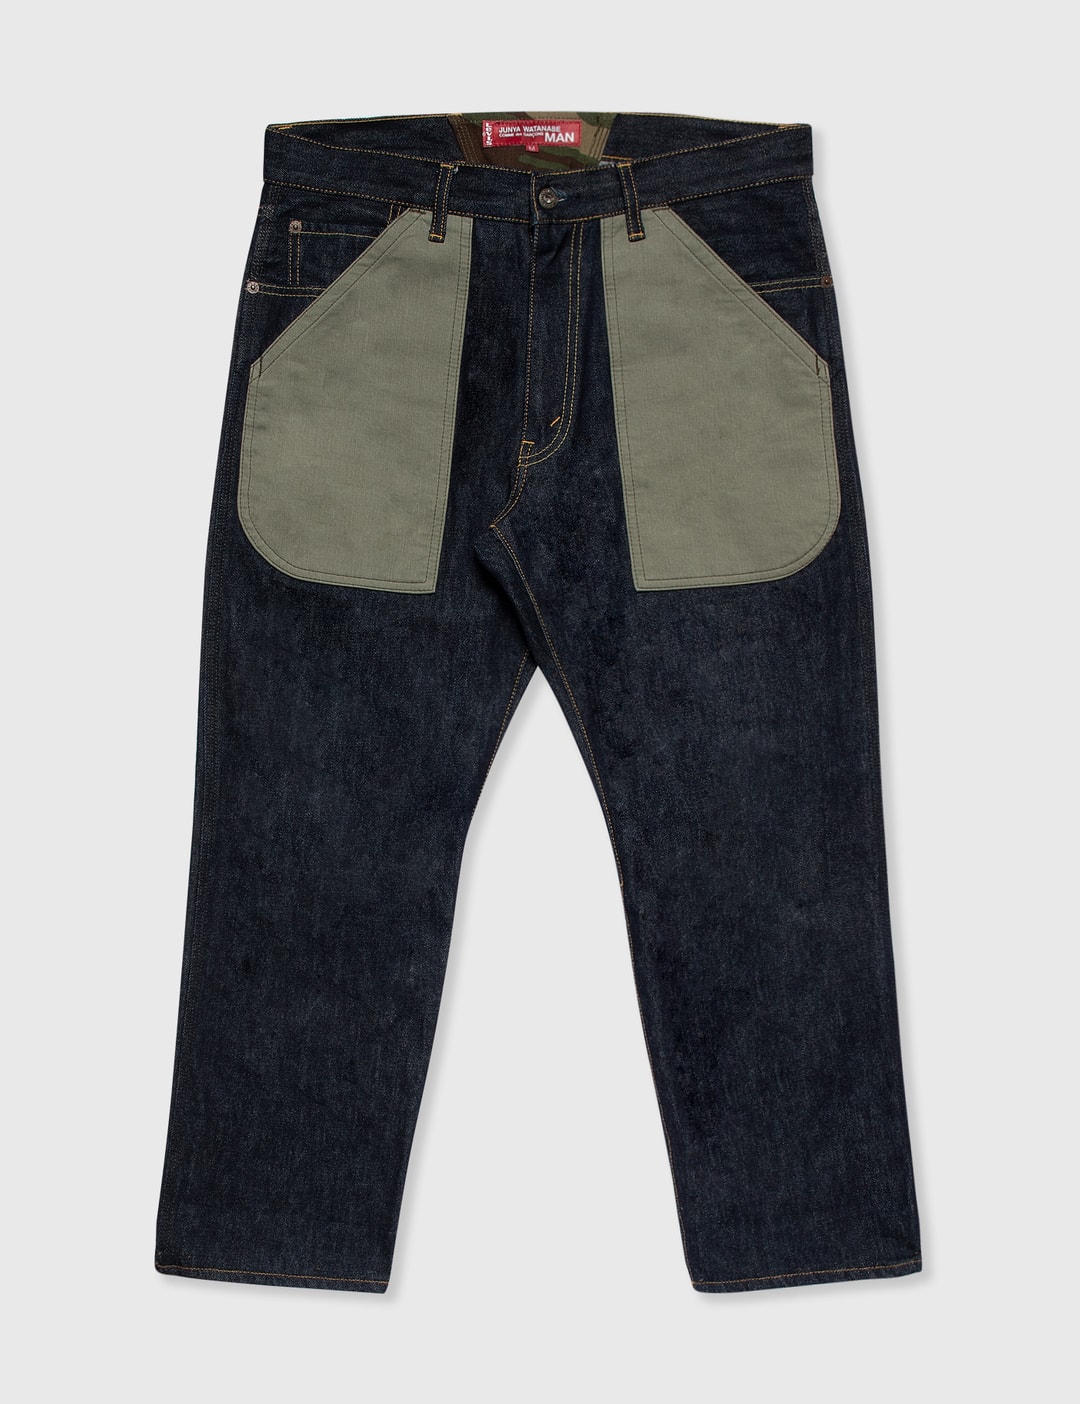 Samlet Tilslutte Fern Junya Watanabe Man - Junya Watanabe Man X Levi's Olive Patchwork Jeans |  HBX - Globally Curated Fashion and Lifestyle by Hypebeast